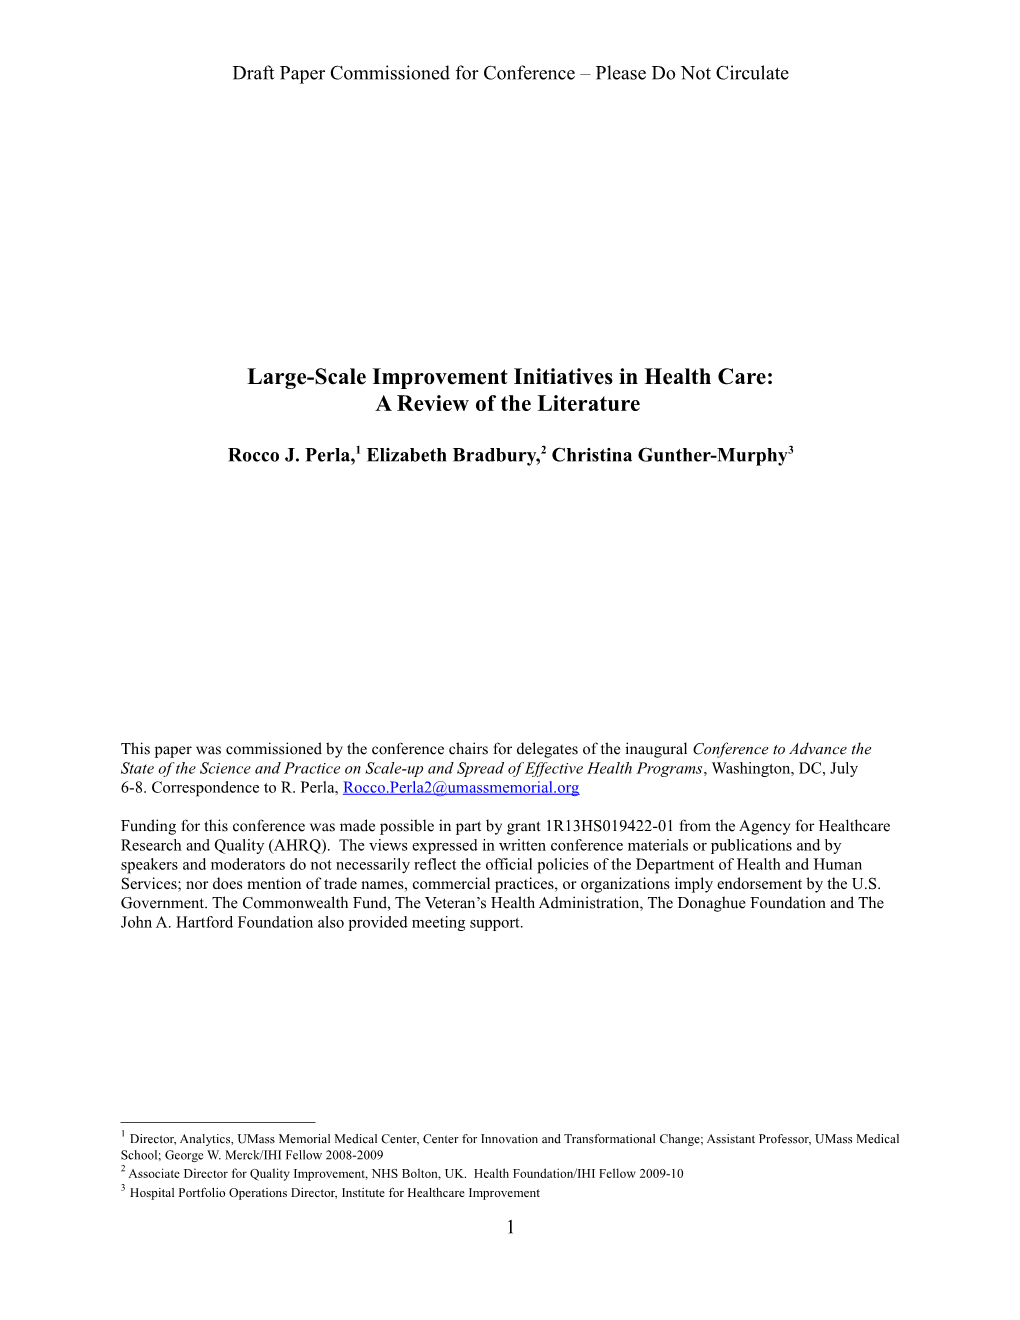 Large-Scale Improvement Initiatives in Health Care